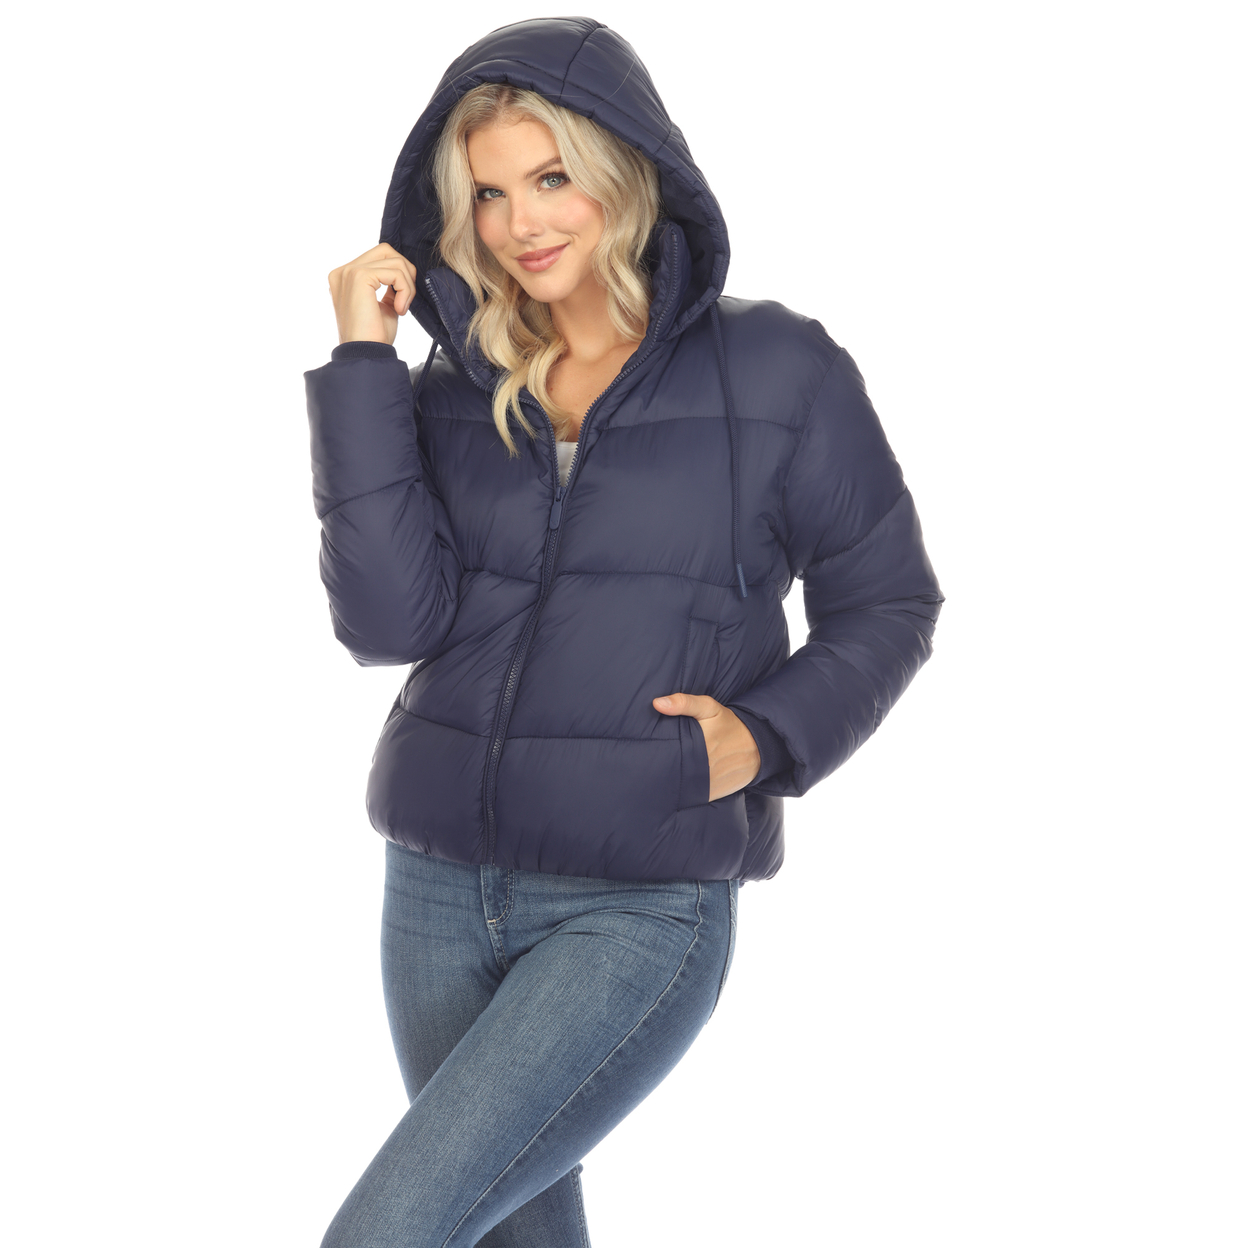 White Mark Women's Zip Hooded Puffer Jacket With Pockets - Black, 3x